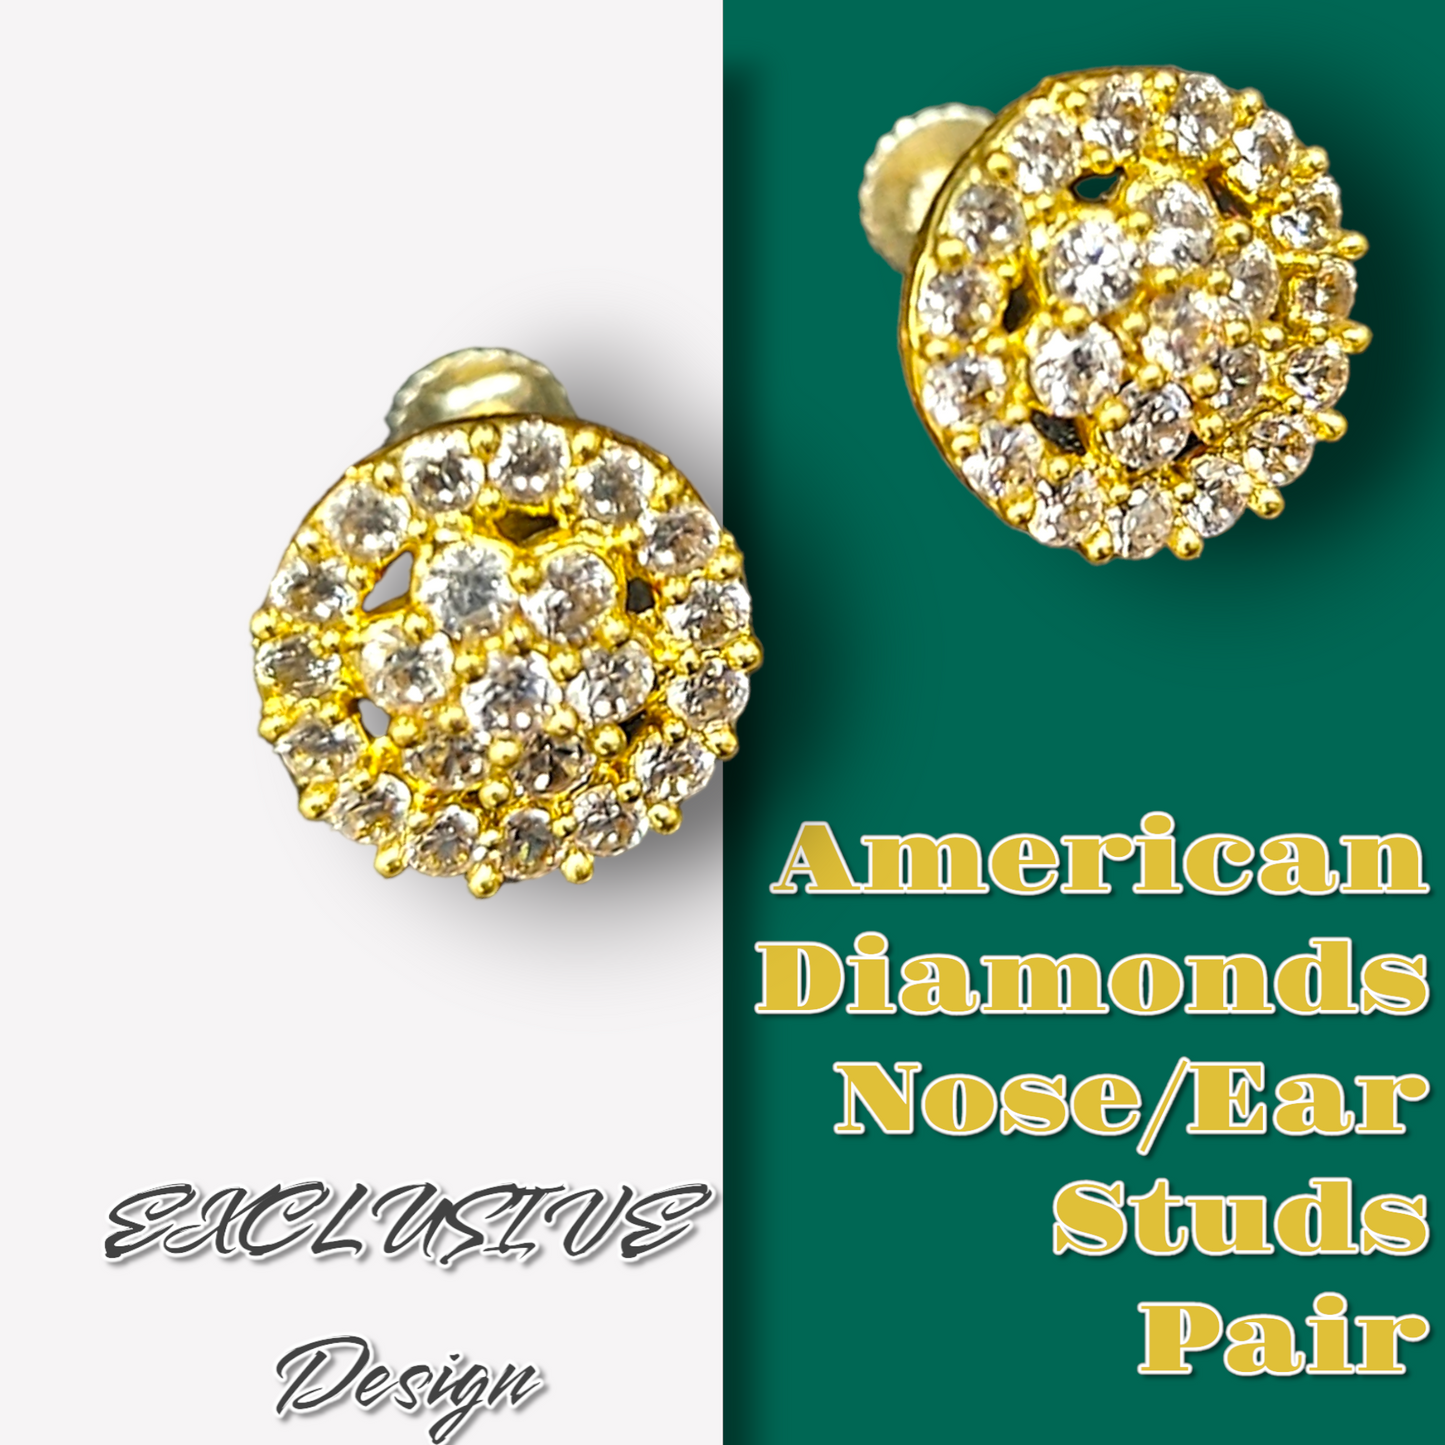 "Timeless Sparkle: White Zirconia Nose and Ear Studs